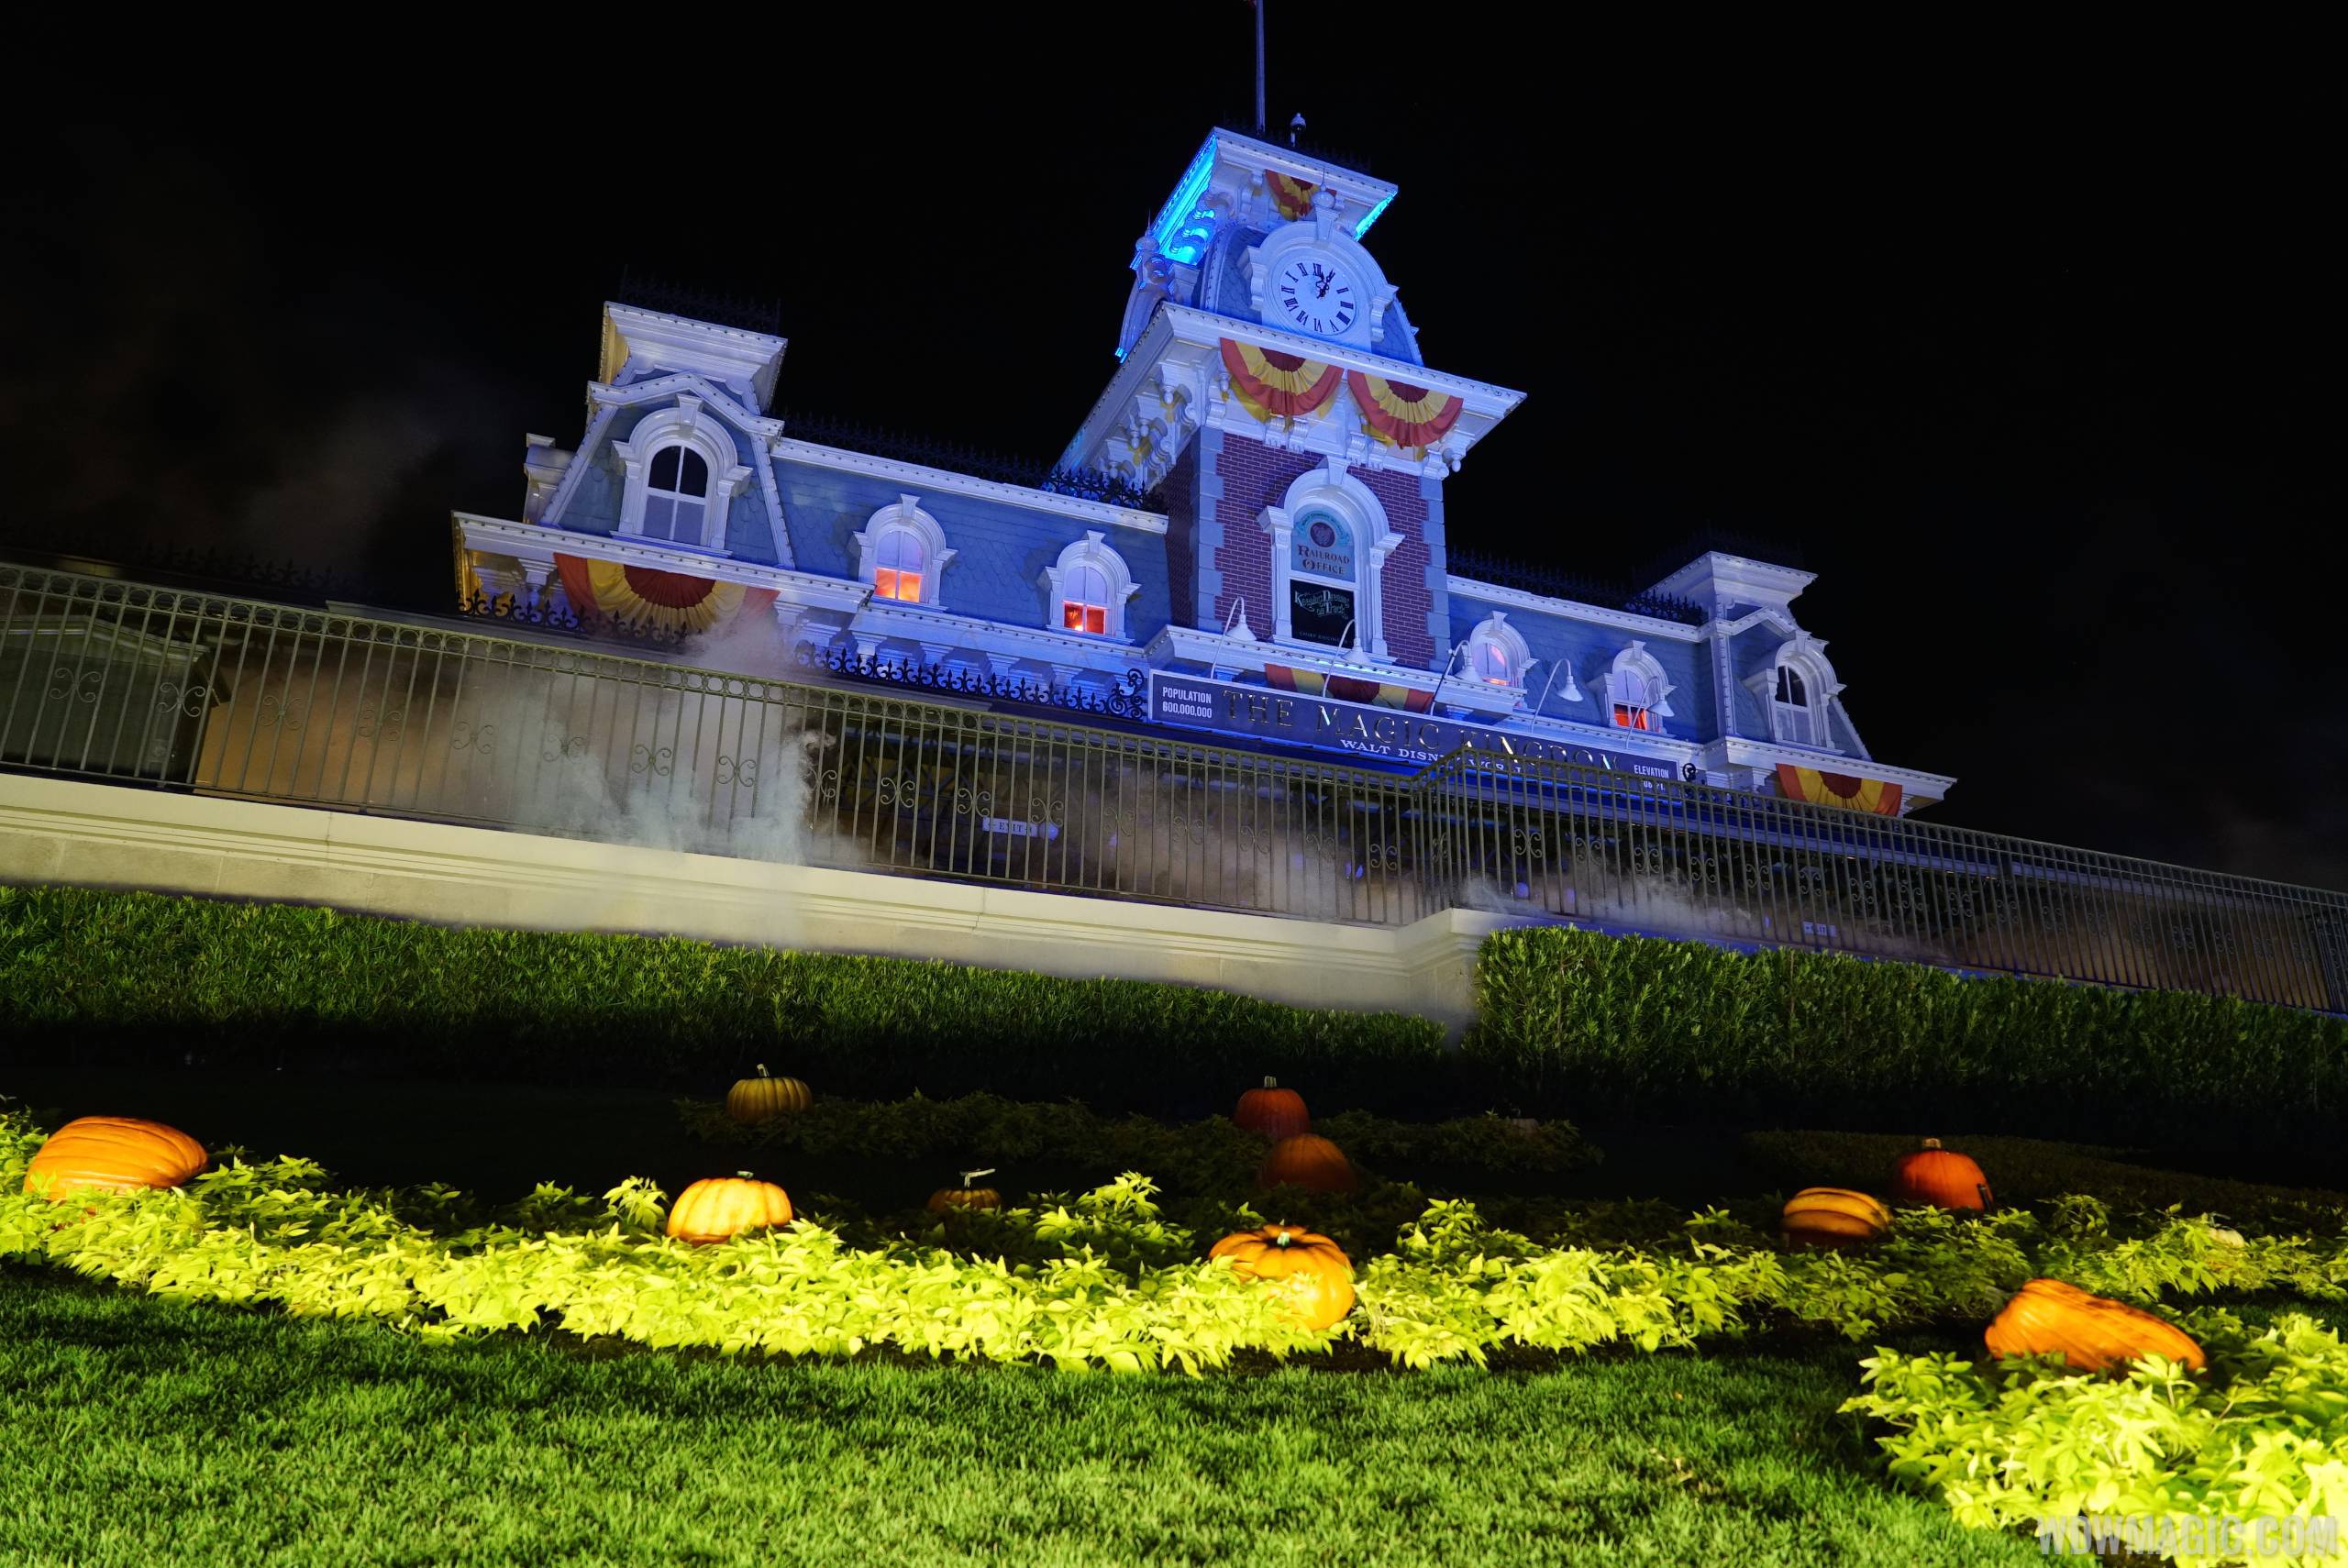 Main Street Train Station during Mickey's Not So Scary Halloween Party